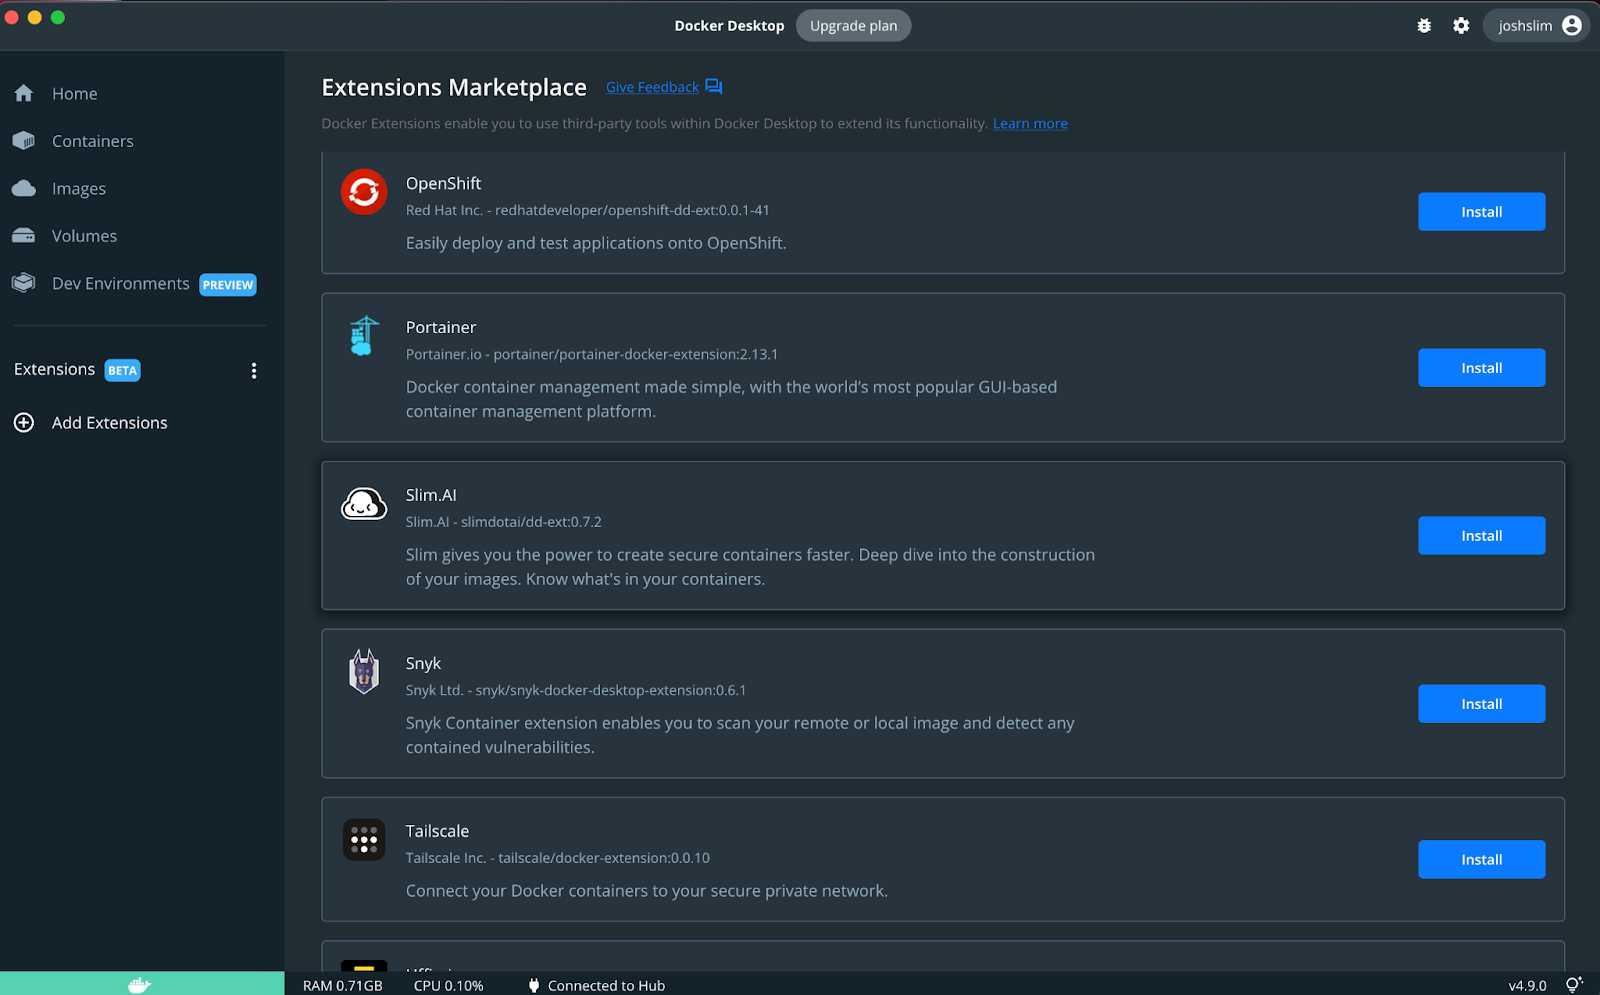 This screenshot showcases the docker desktop extensions marketplace with a list of extensions to choose from.